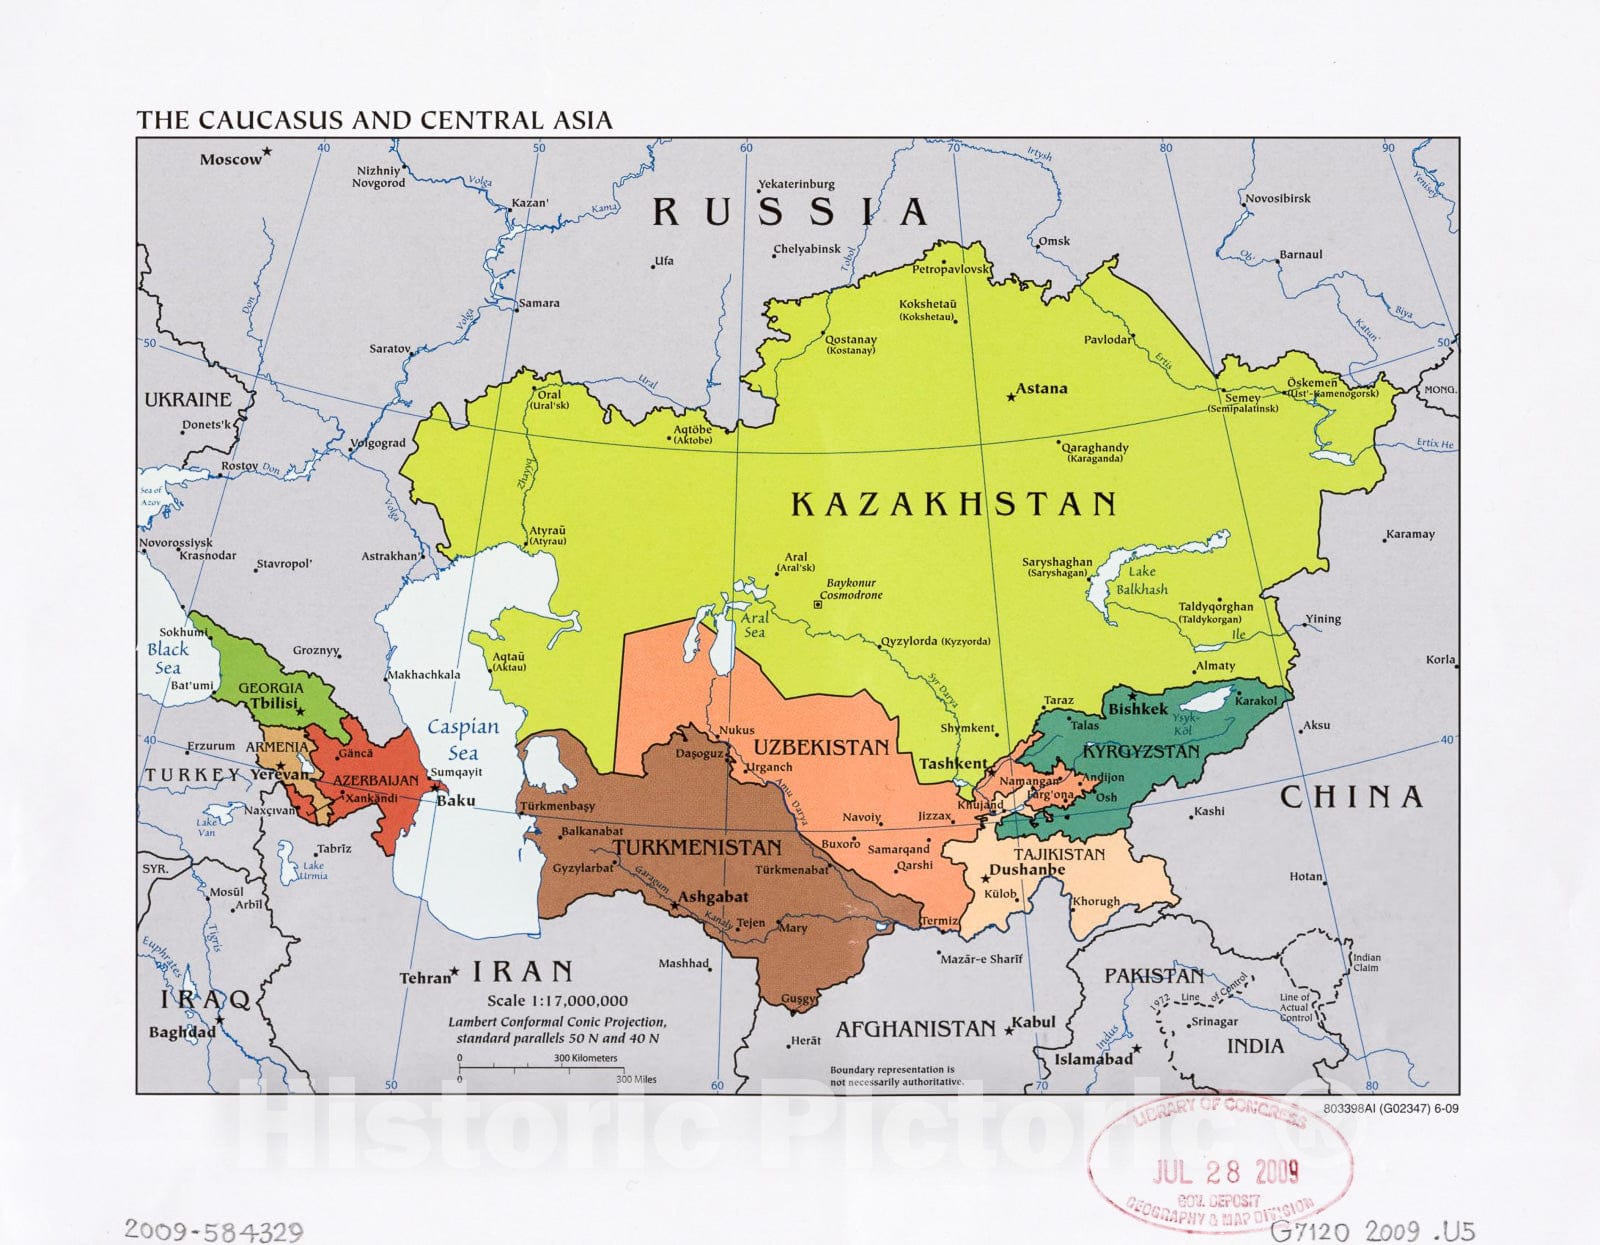 Historic 2009 Map - The Caucasus and Central Asia.